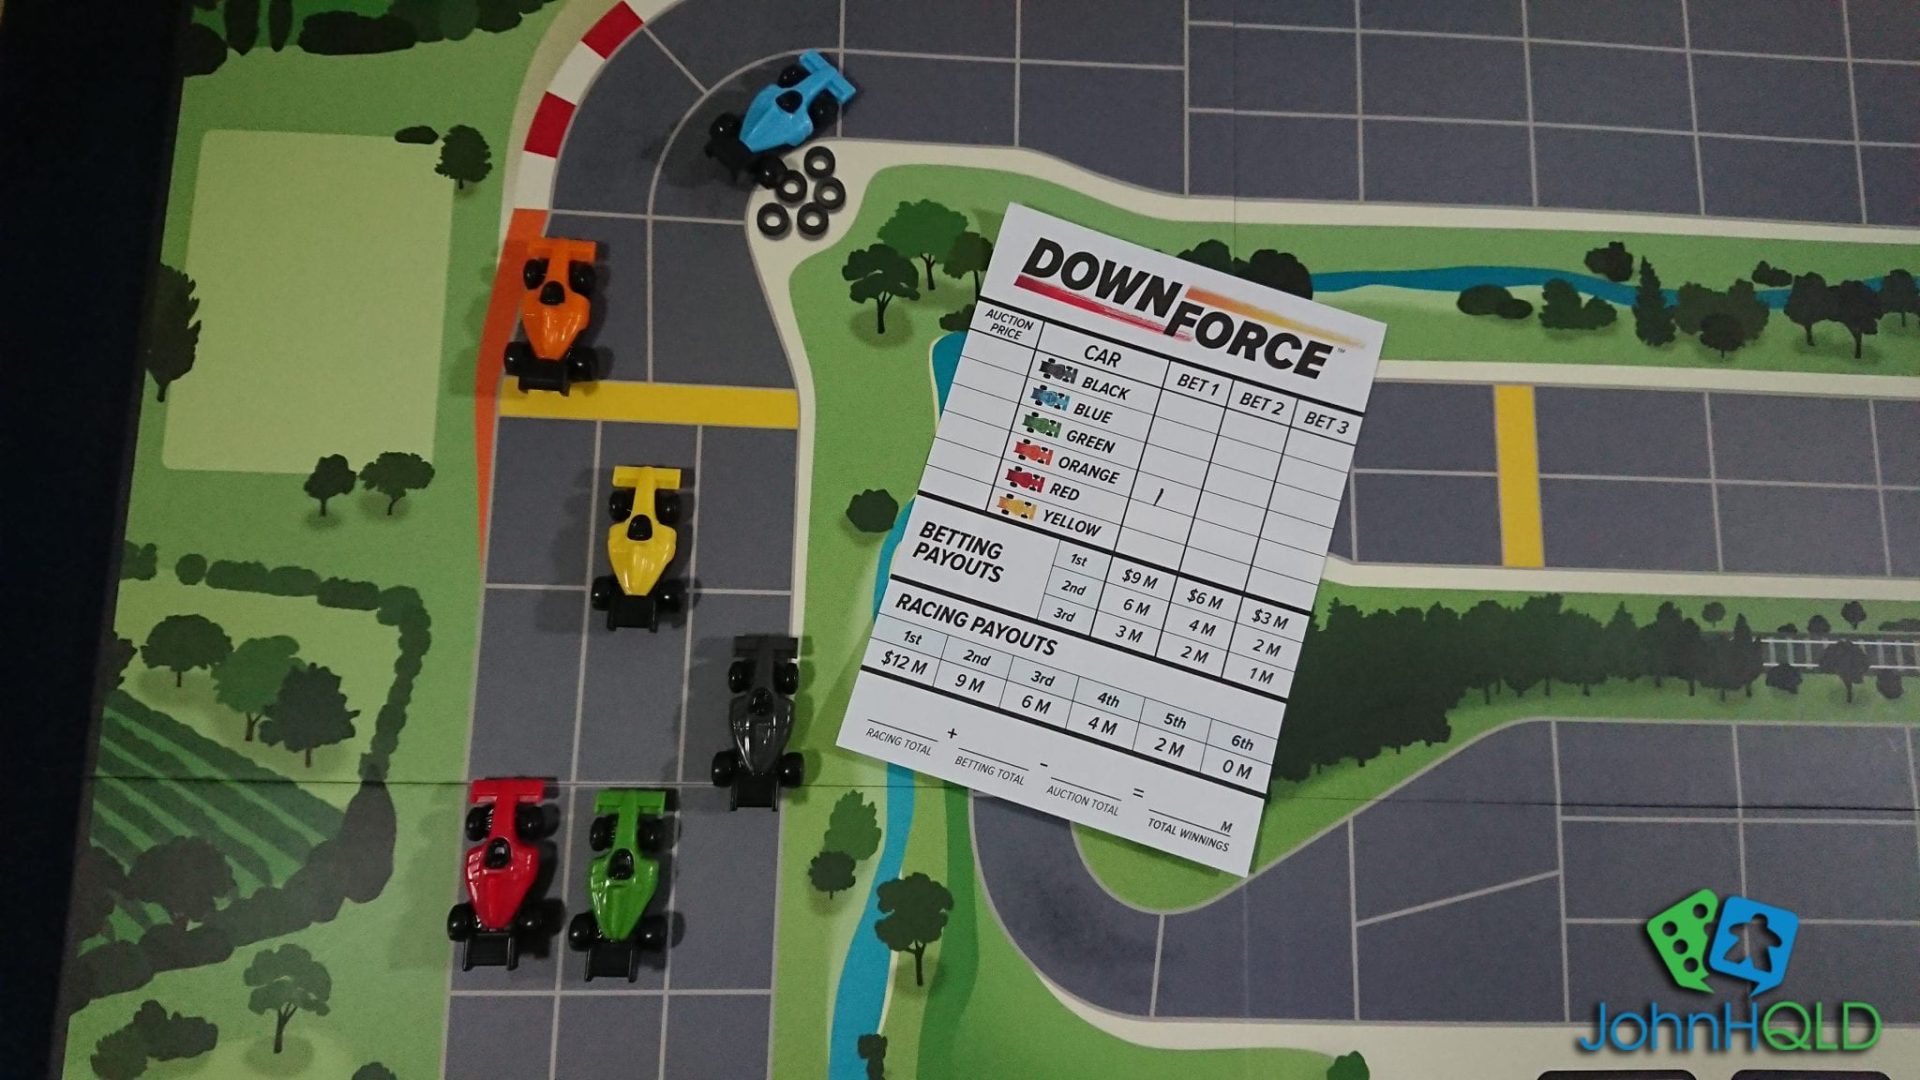 Review - Downforce - Betting